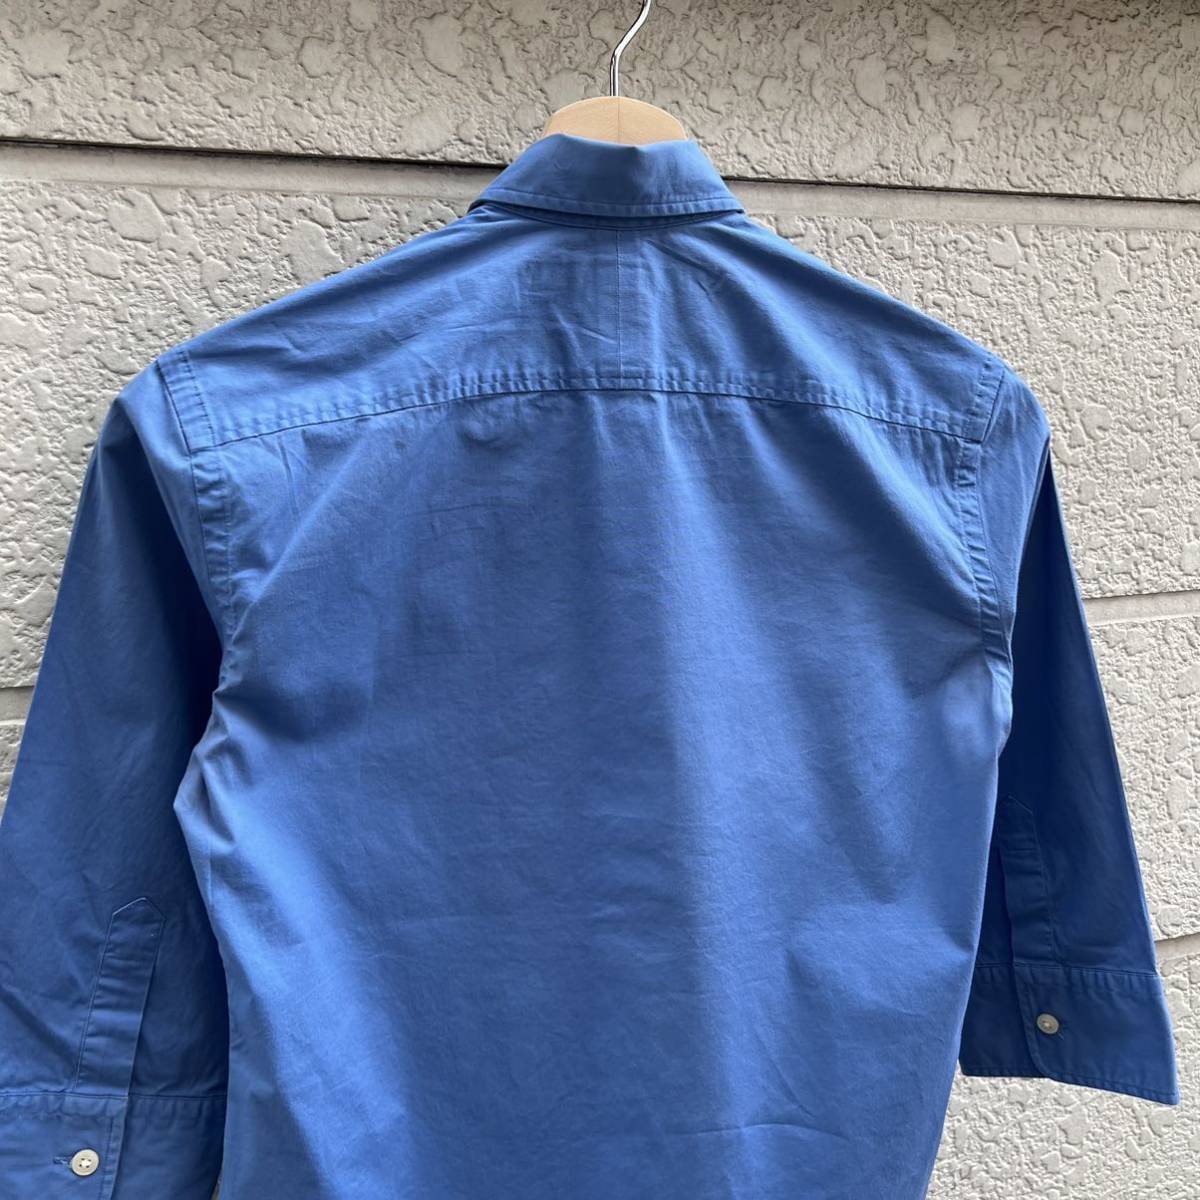 USED USA old clothes Ralph Lauren lady's shirt light blue light blue RALPH LAUREN SPORT half edge sleeve America old clothes vintage Vintage po knee 